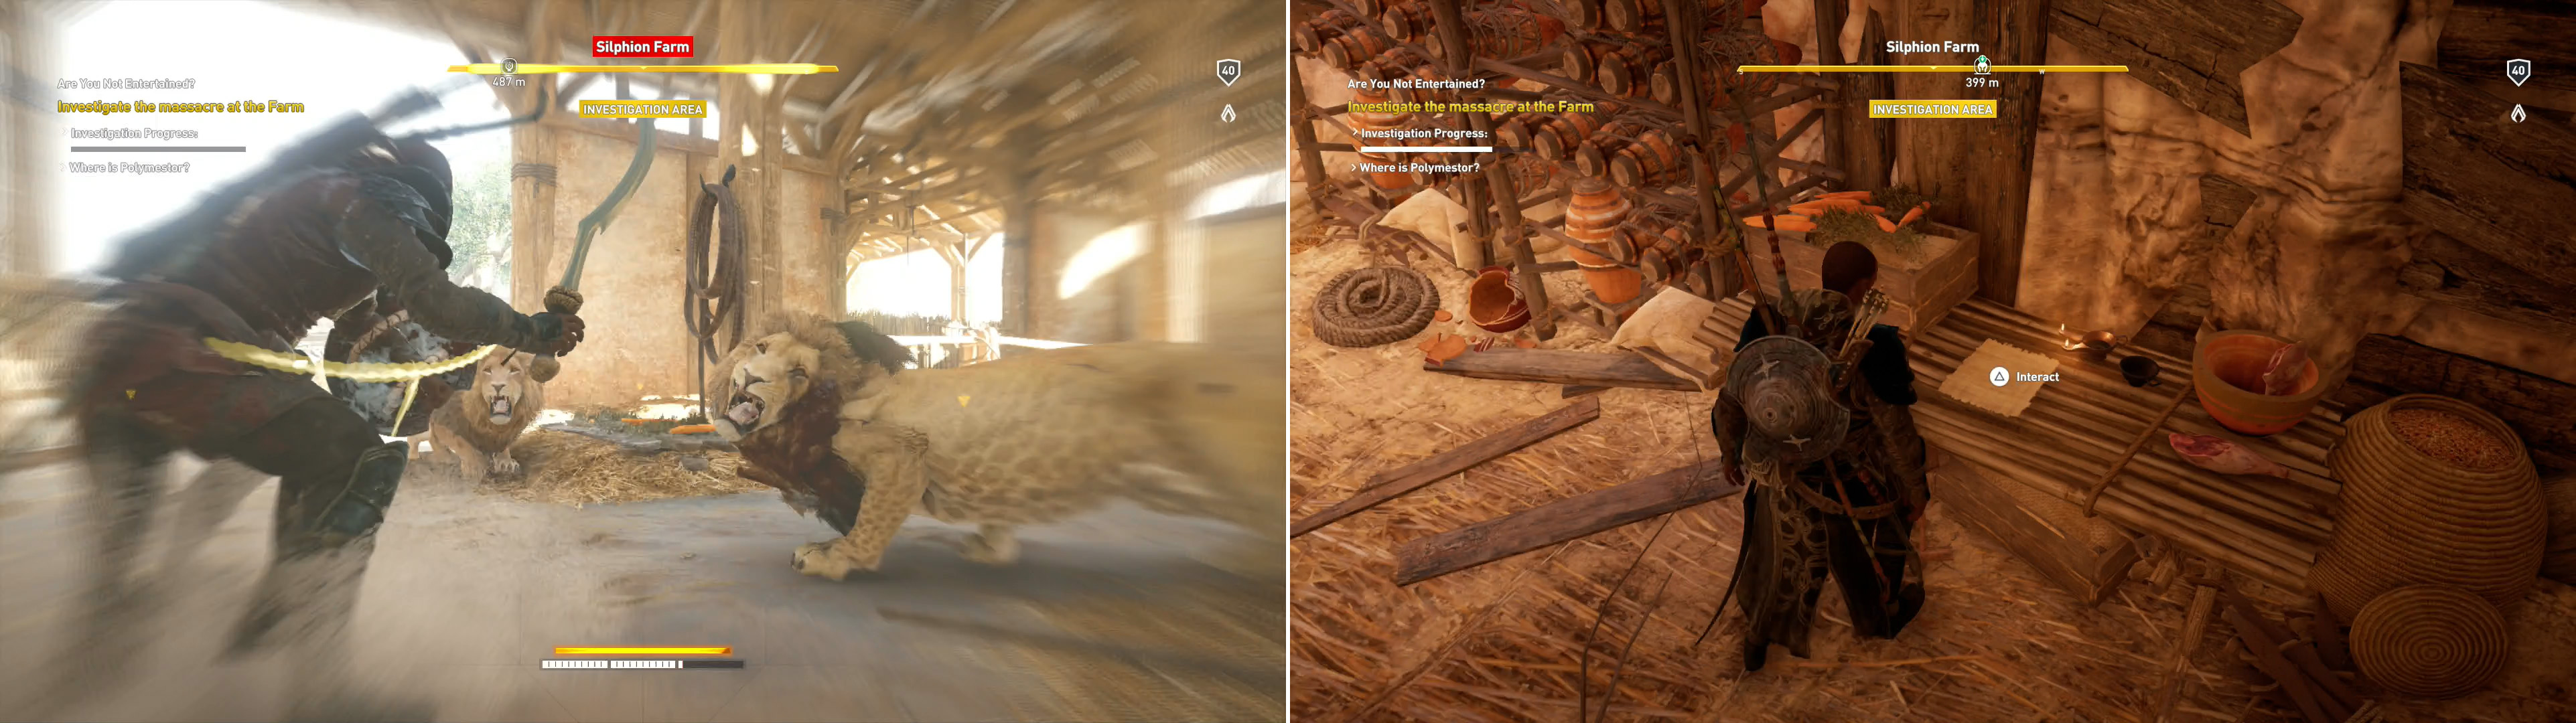 Kill the lions at the farm (left), then search for a letter in a hidden cellar (right).